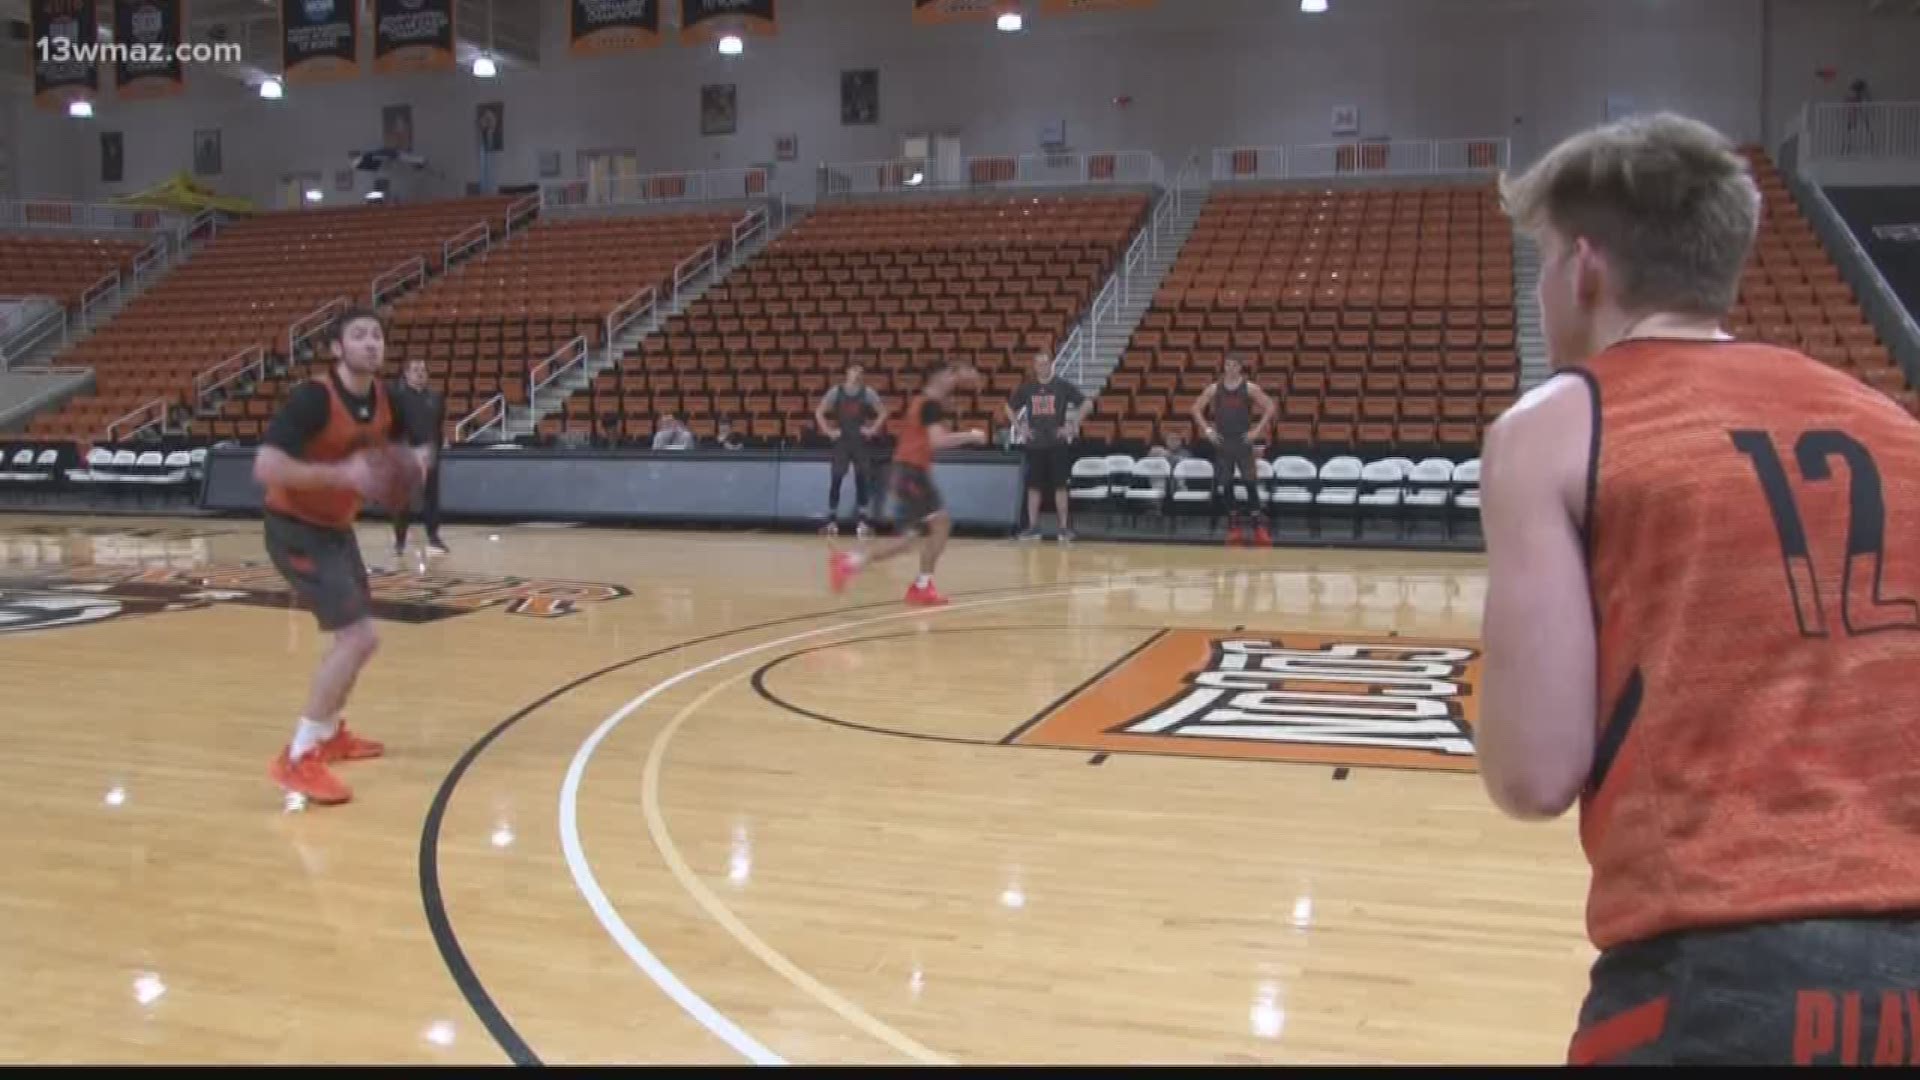 On the college level, the Mercer Bears men's team set to return to action in Hawkins Arena on Wednesday.